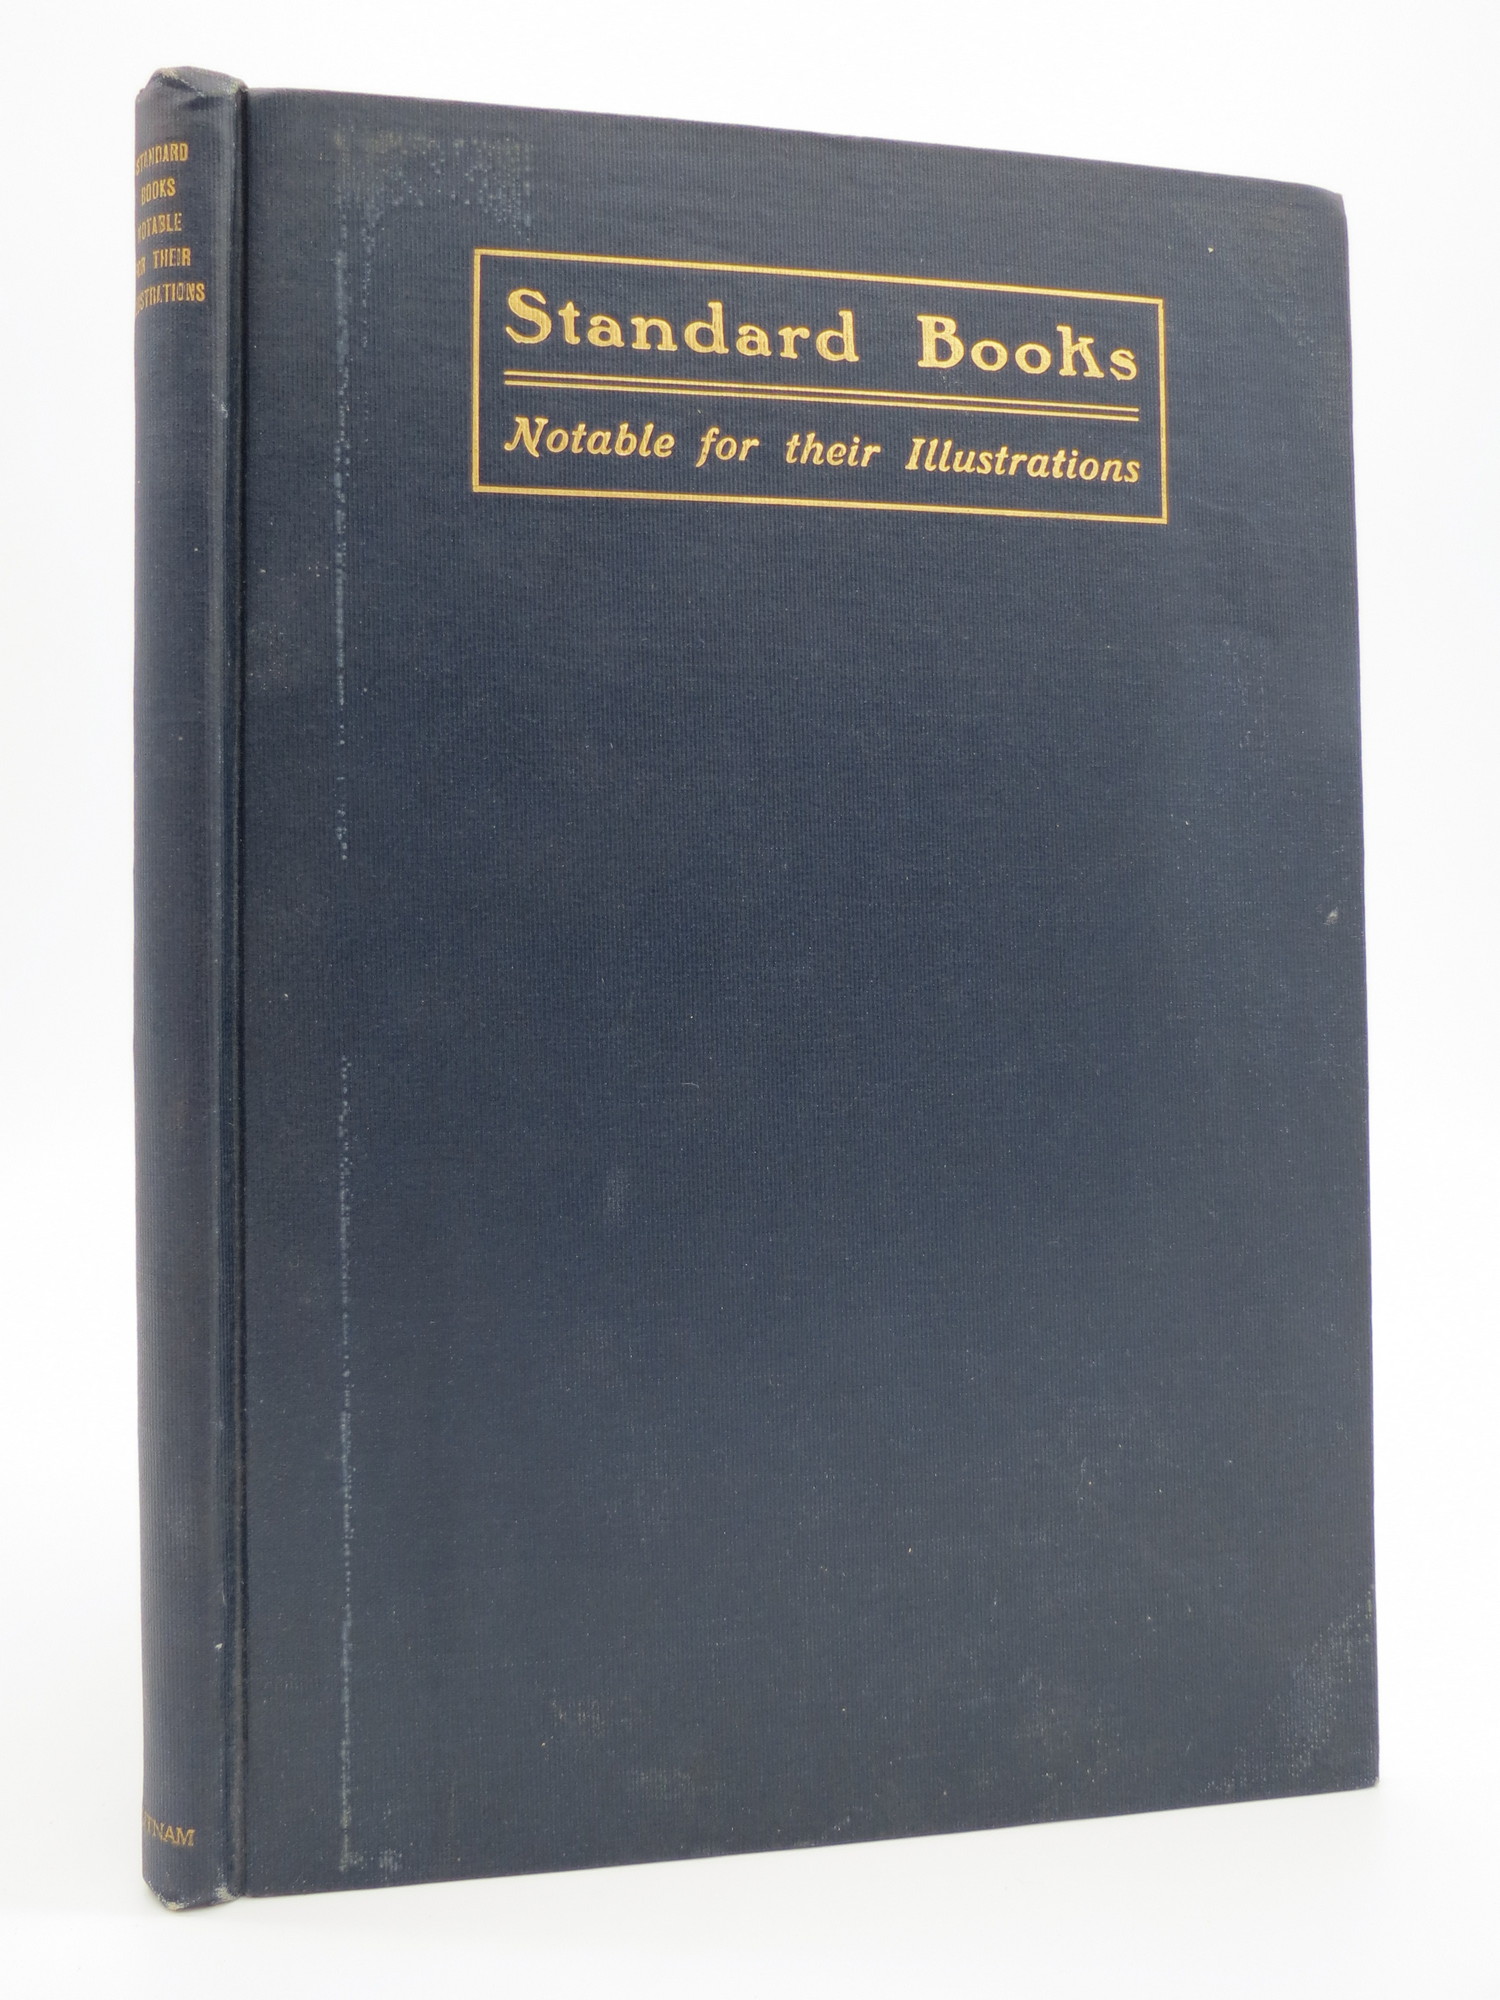 Image for ILLUSTRATED DESCRIPTIVE CATALOGUE OF STANDARD BOOKS Notable for Their Illustrations